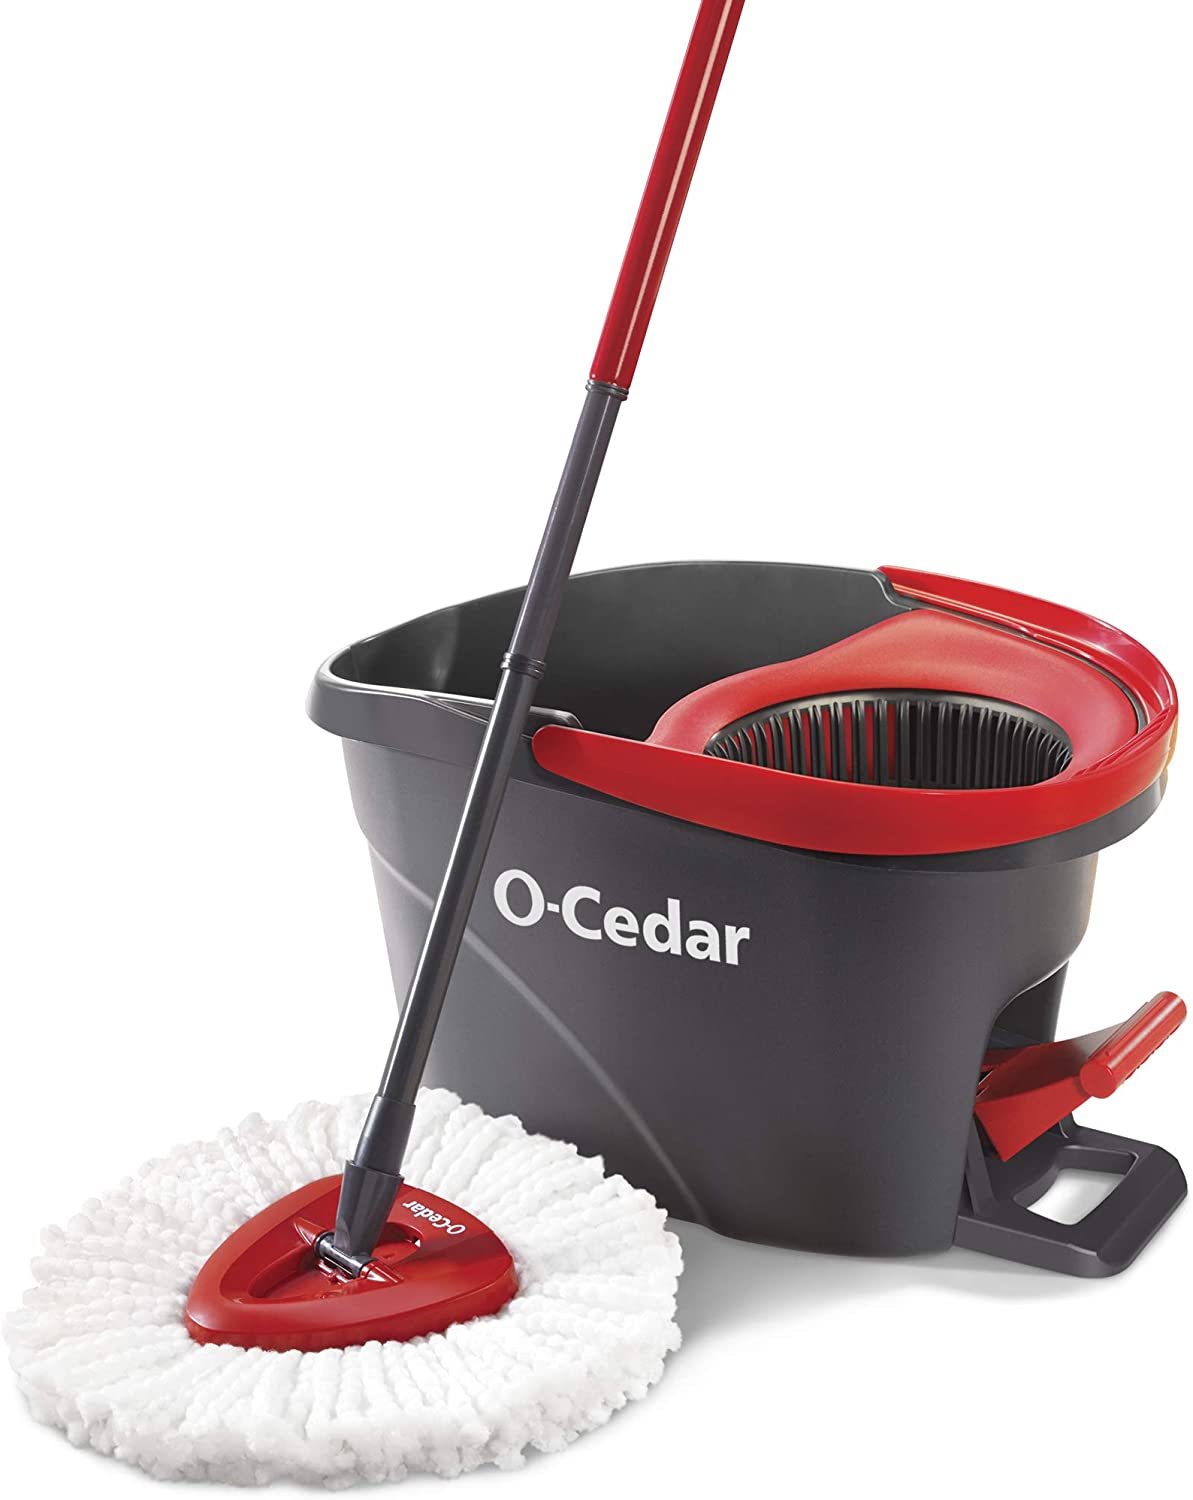 O-Cedar EasyWring Microfiber Spin Mop, Bucket Floor Cleaning System, Red, Gray 51